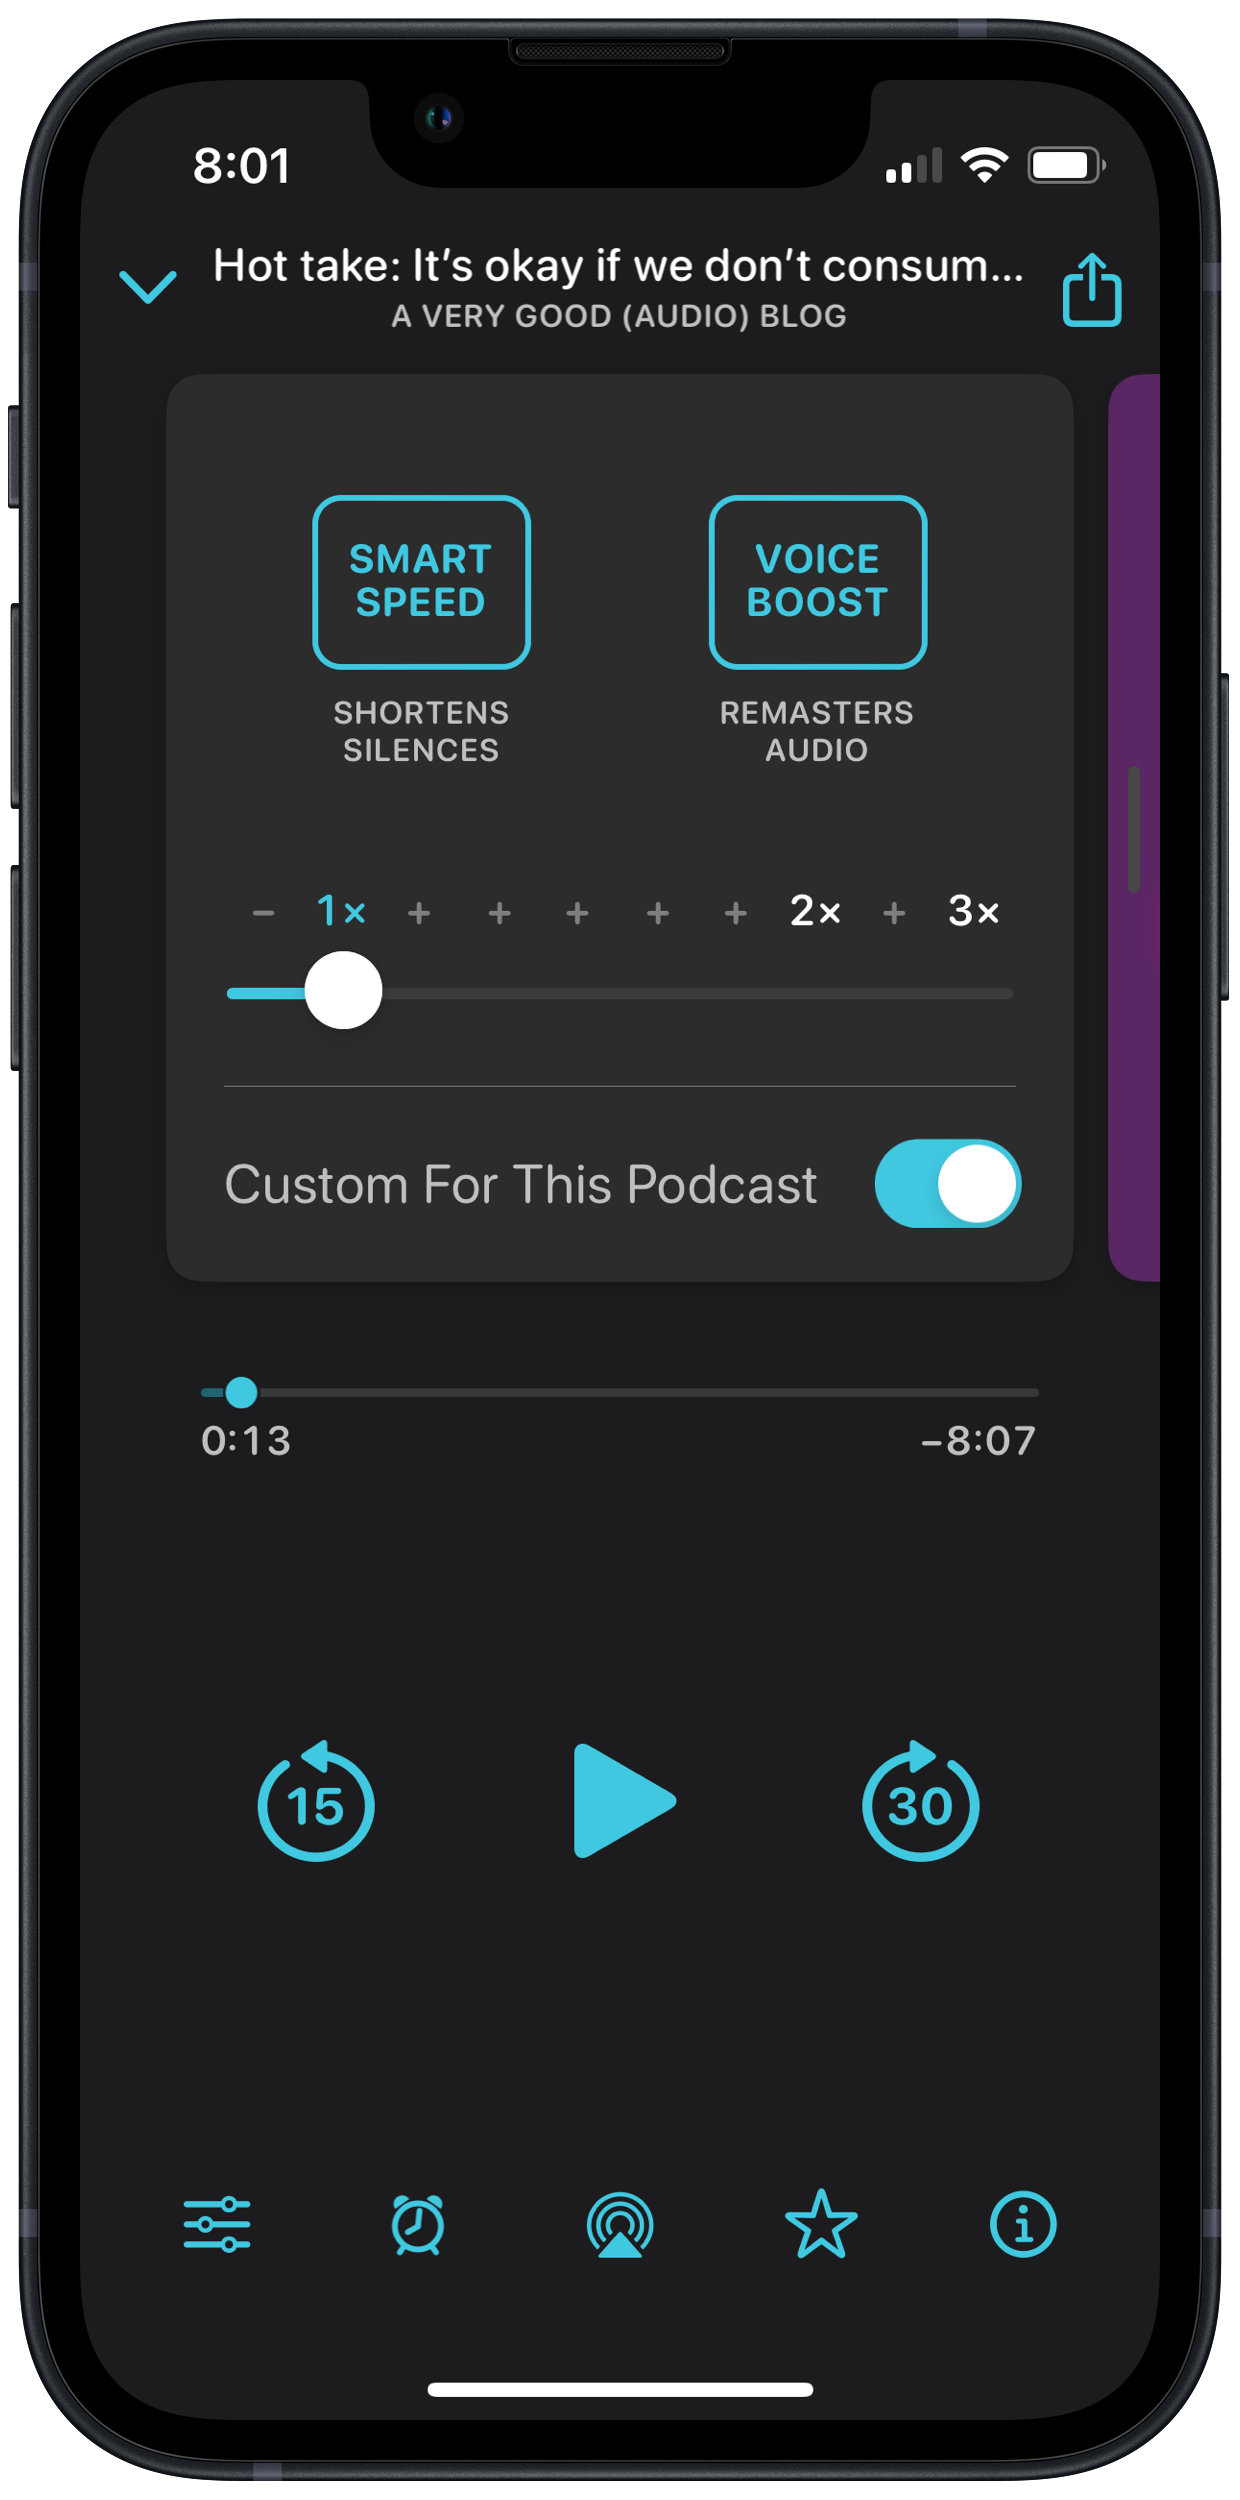 Smartphone screen displaying a podcast app interface with playback controls, with no adjustments enabled.